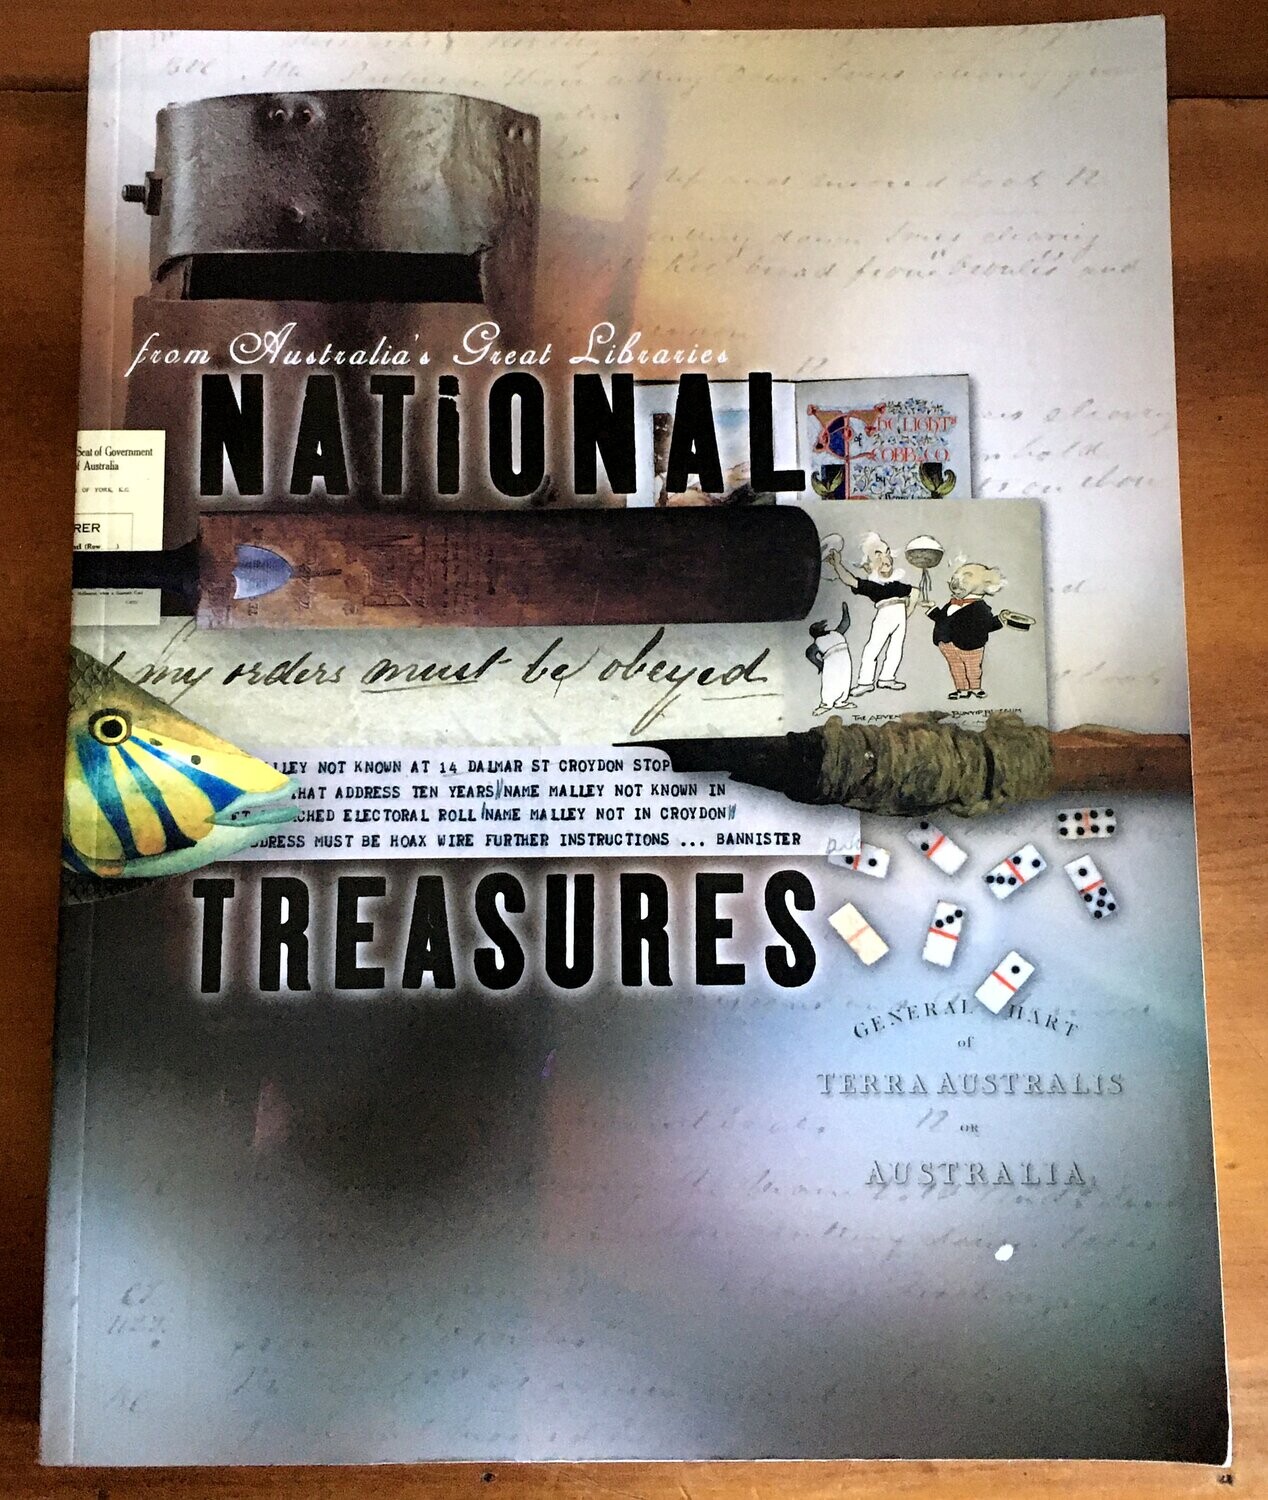 National Treasures from Australia's Great Libraries by National Library of Australia